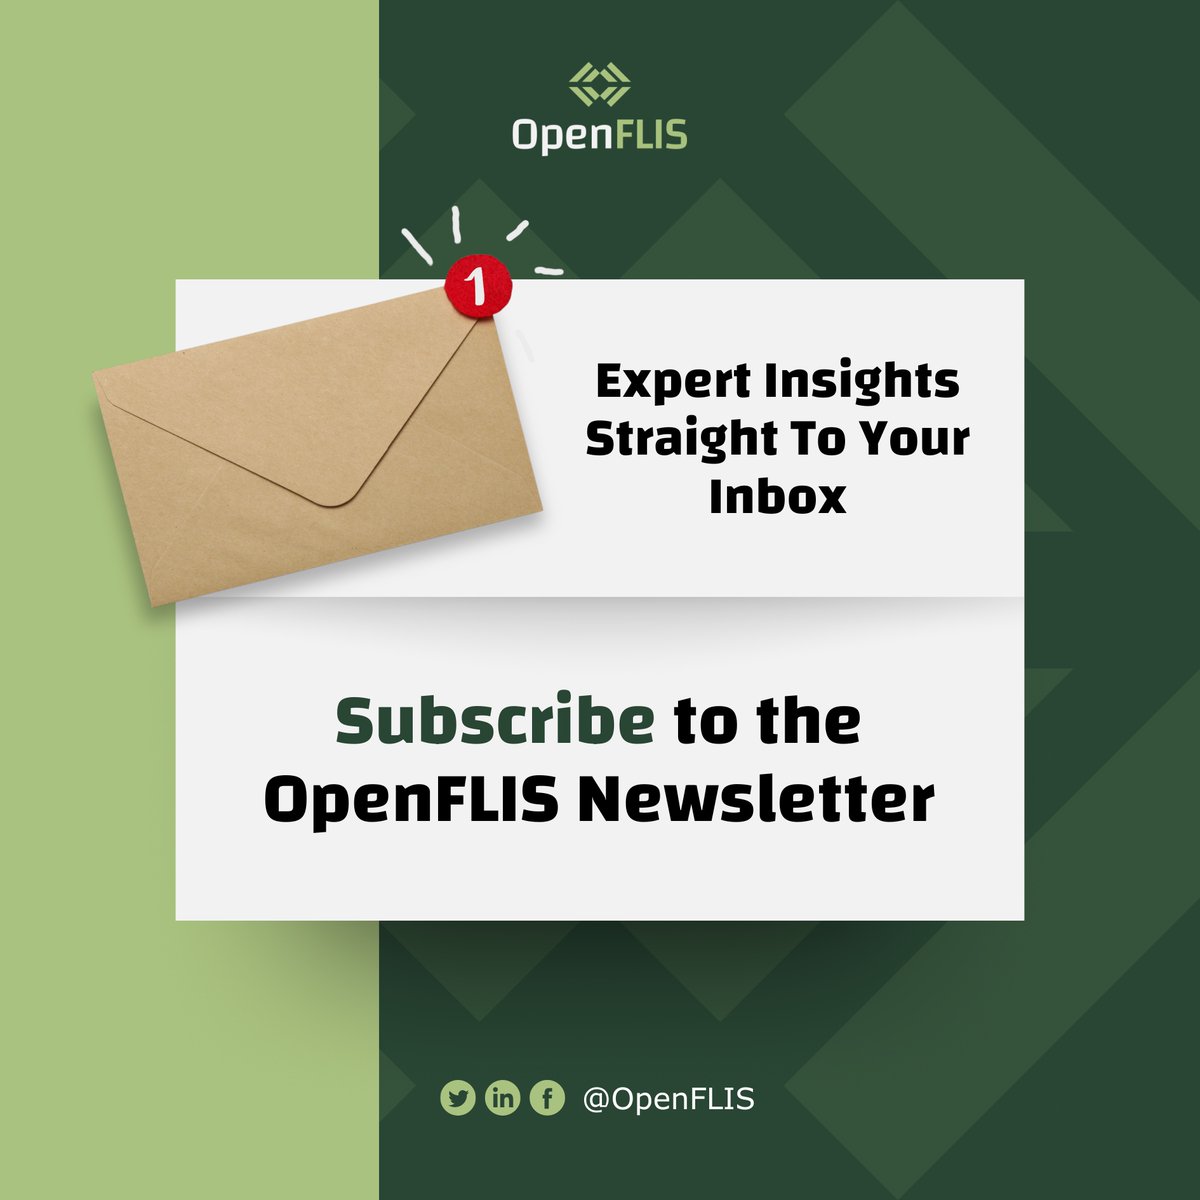 📣 Be the First to Know: Don't miss out on important updates, product releases, and special offers from OpenFLIS. 

💌 Join the OpenFLIS Community.

Enter your email address and click on the 'Get Early Access' Link at seller.OpenFLIS.com.

#Newsletter